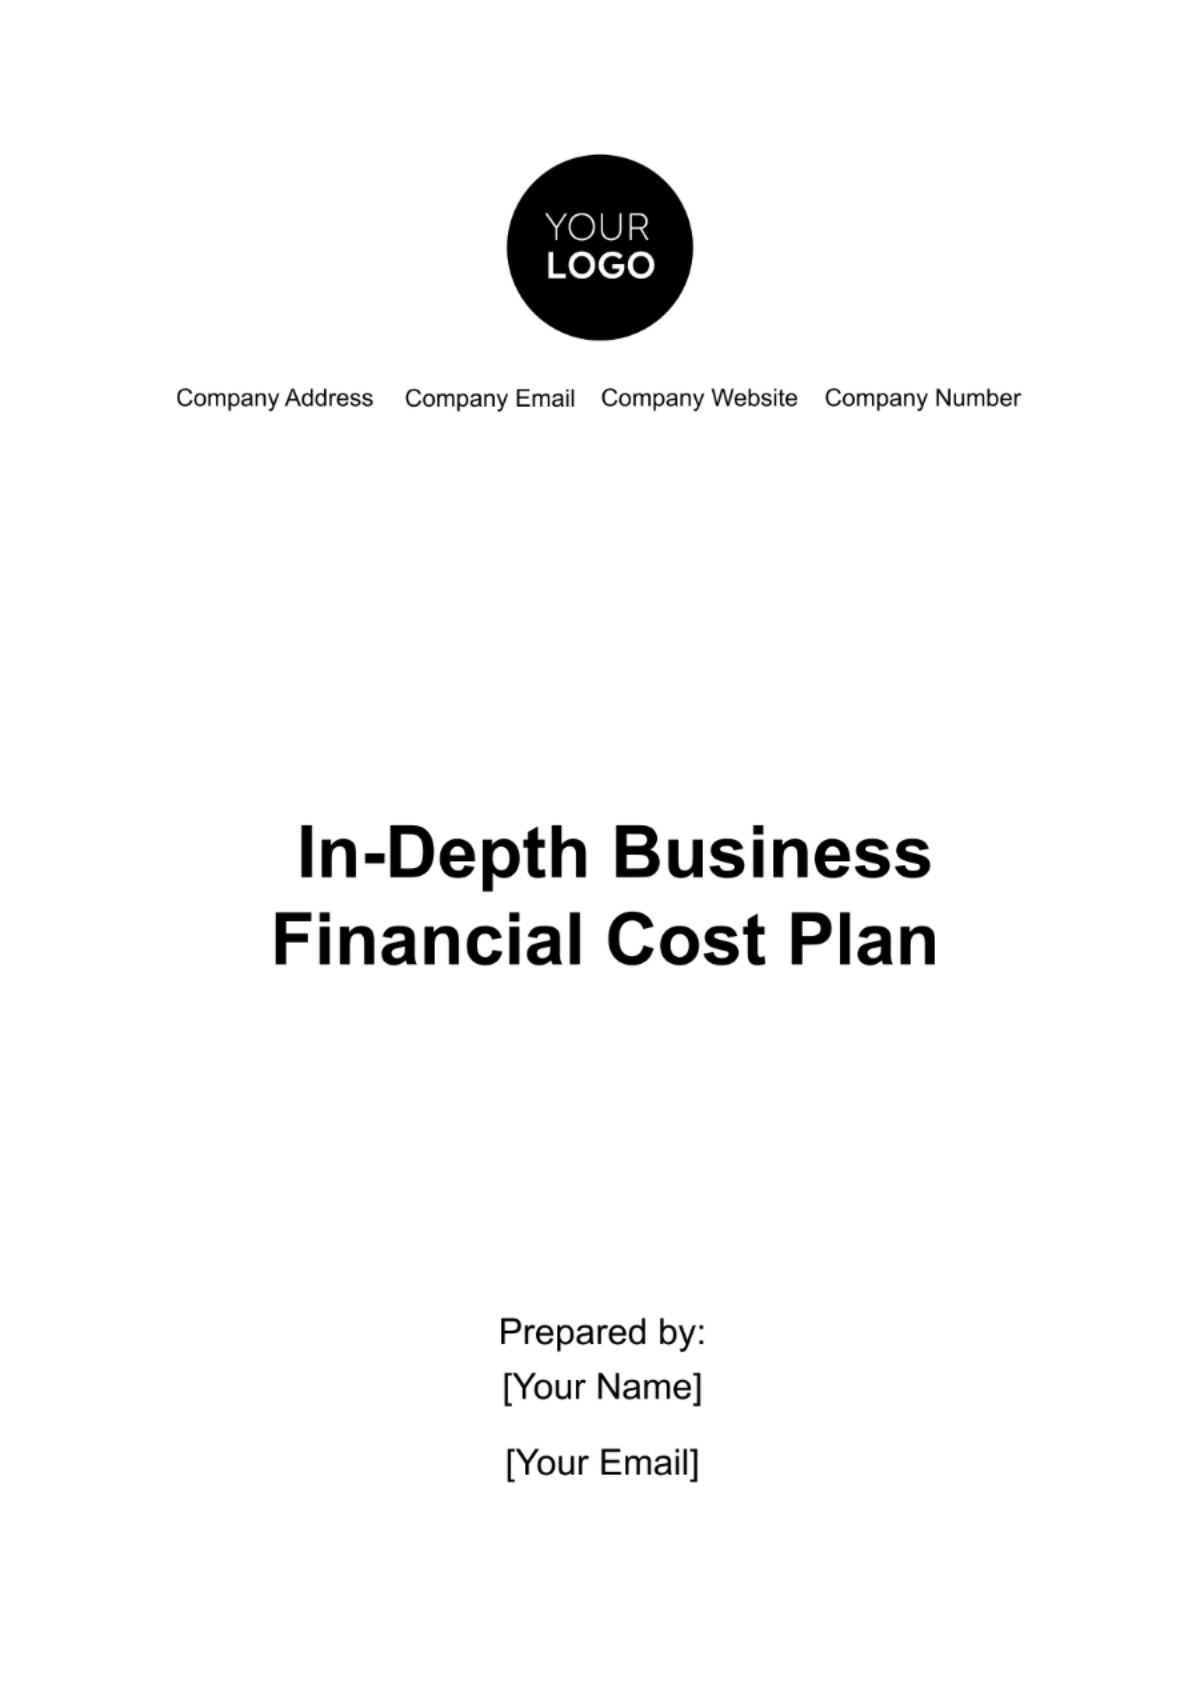 In-Depth Business Financial Cost Plan Template